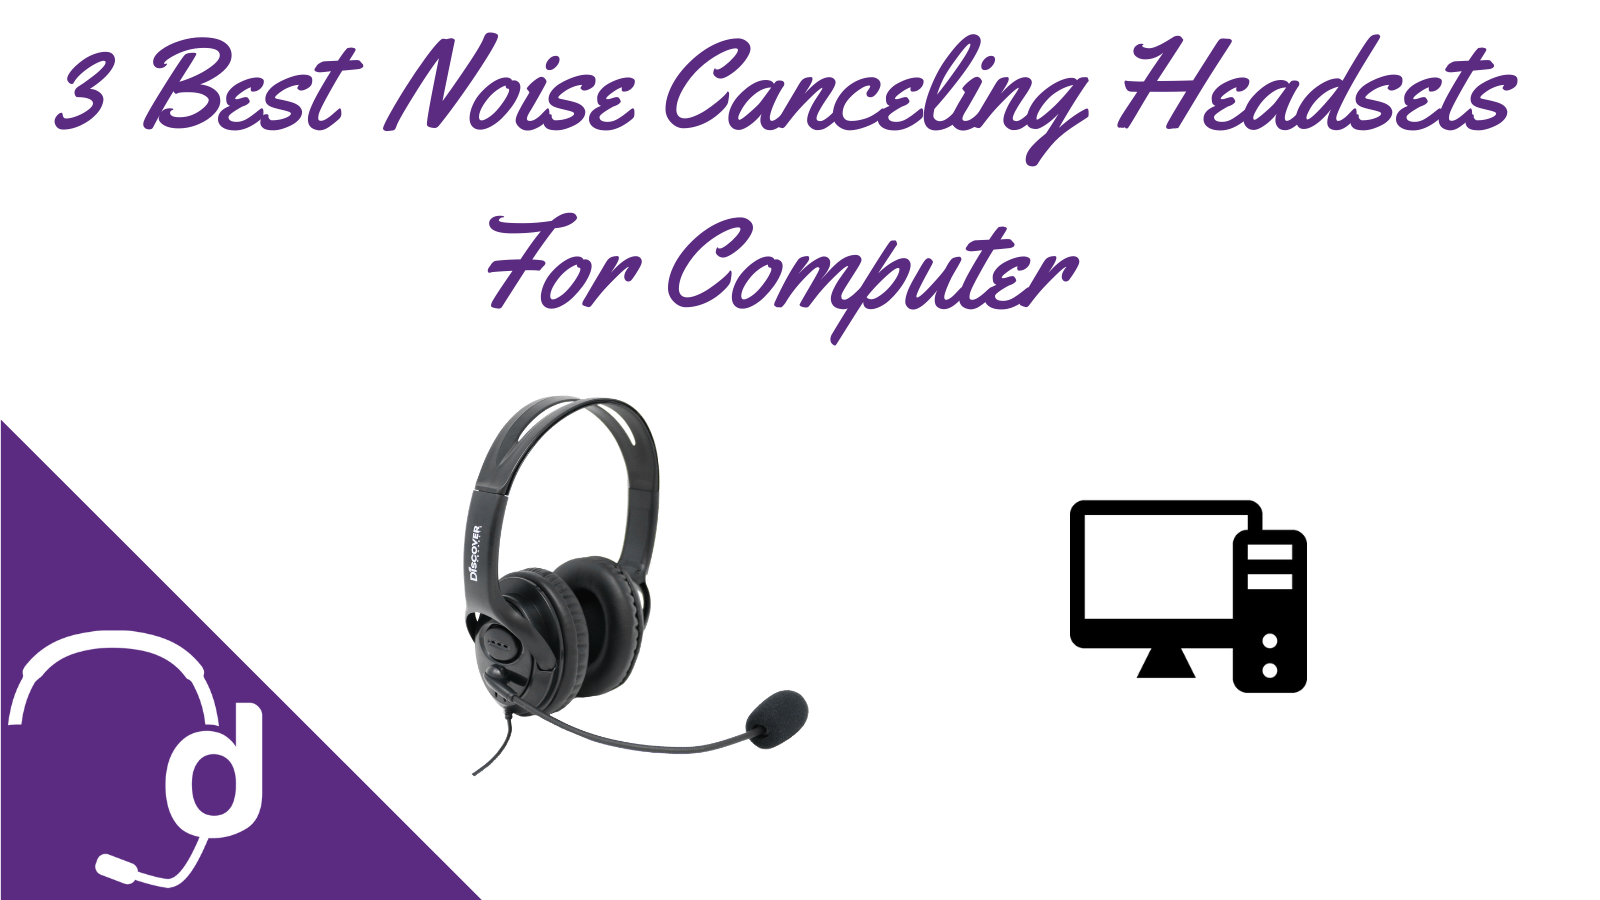 3 Best Noise Canceling Headsets For Call Centers Using Computer Applications - Headset Advisor